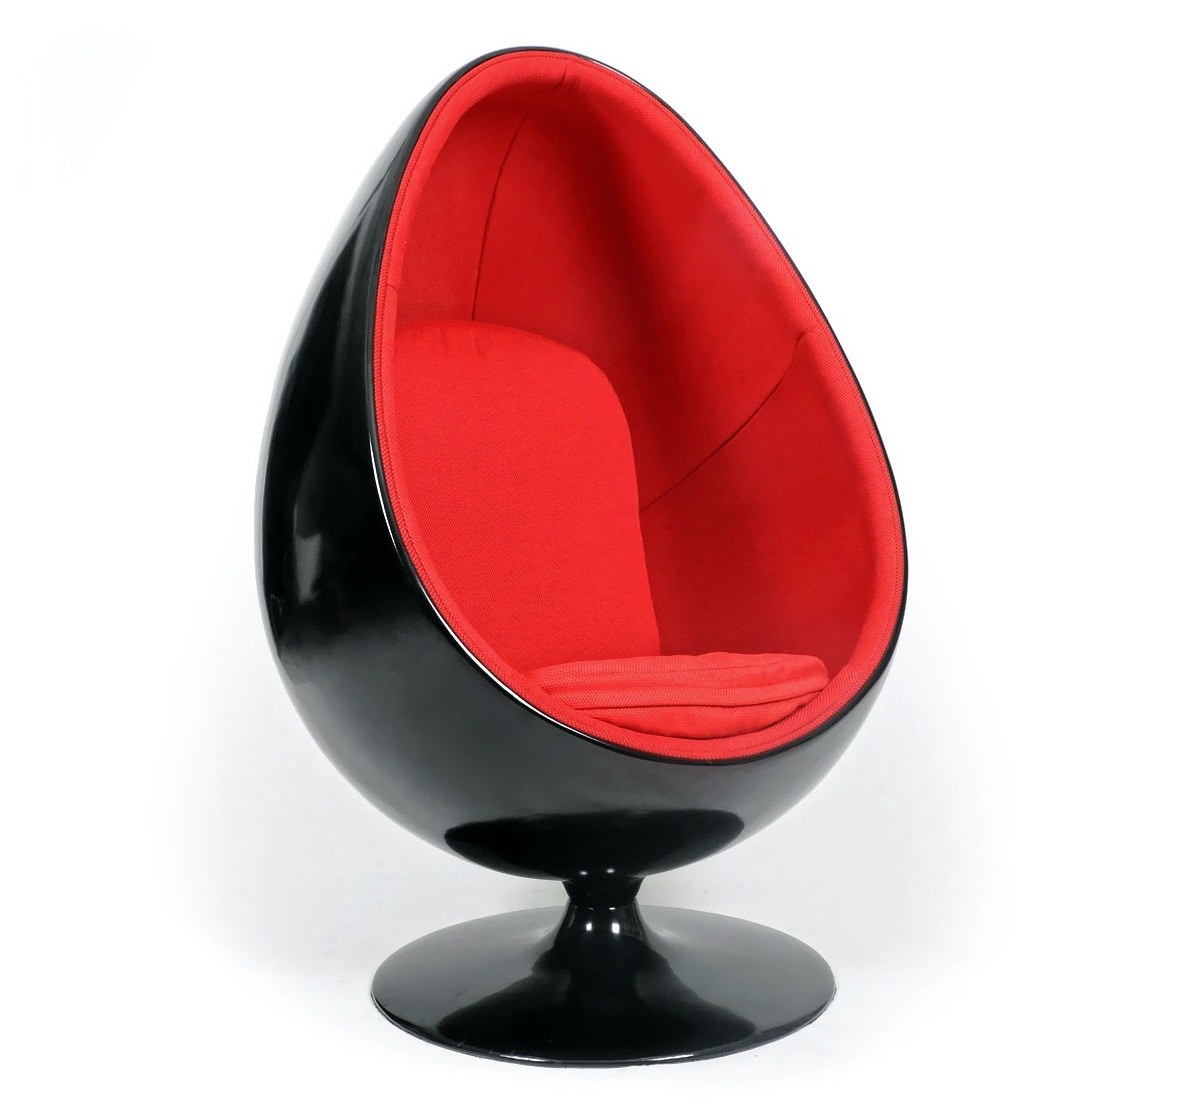 EGG CHAIR Designed by Eero Aarnio in 1963 (760x870x1350)mm 40 kgs Price: 12.000.000 VND